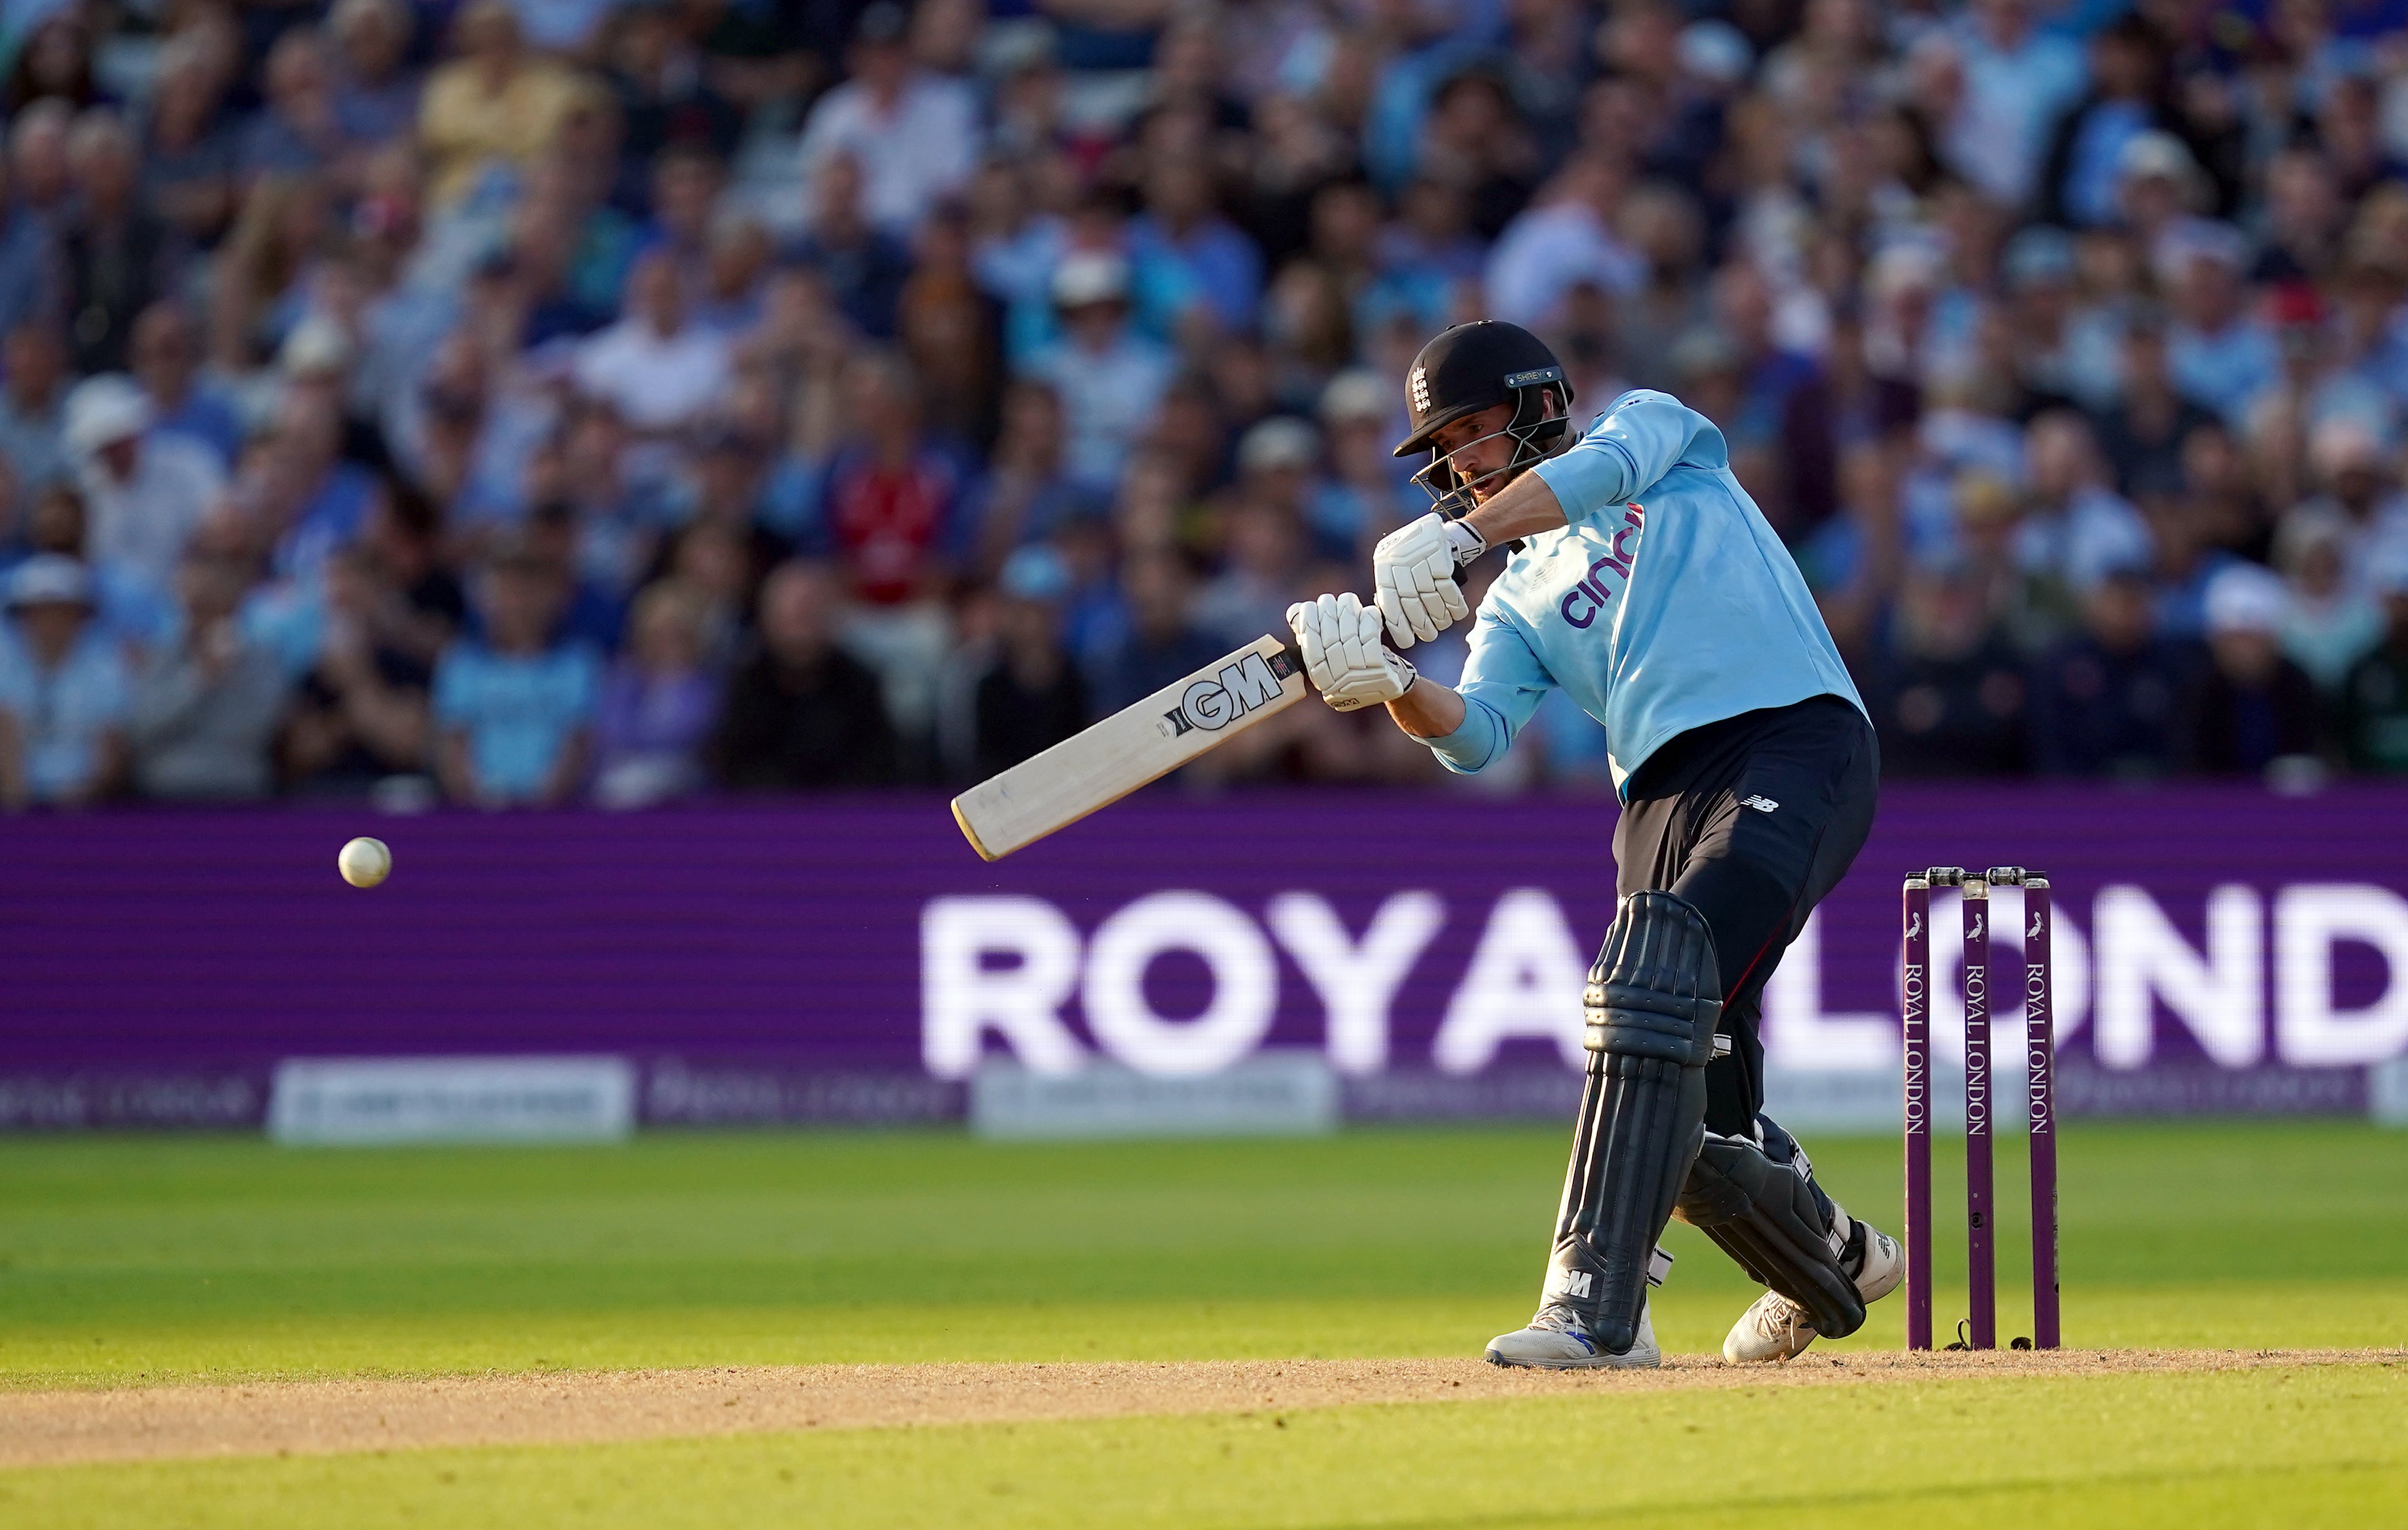 James Vince scored 40 in England’s convincing win (Martin Rickett/PA)